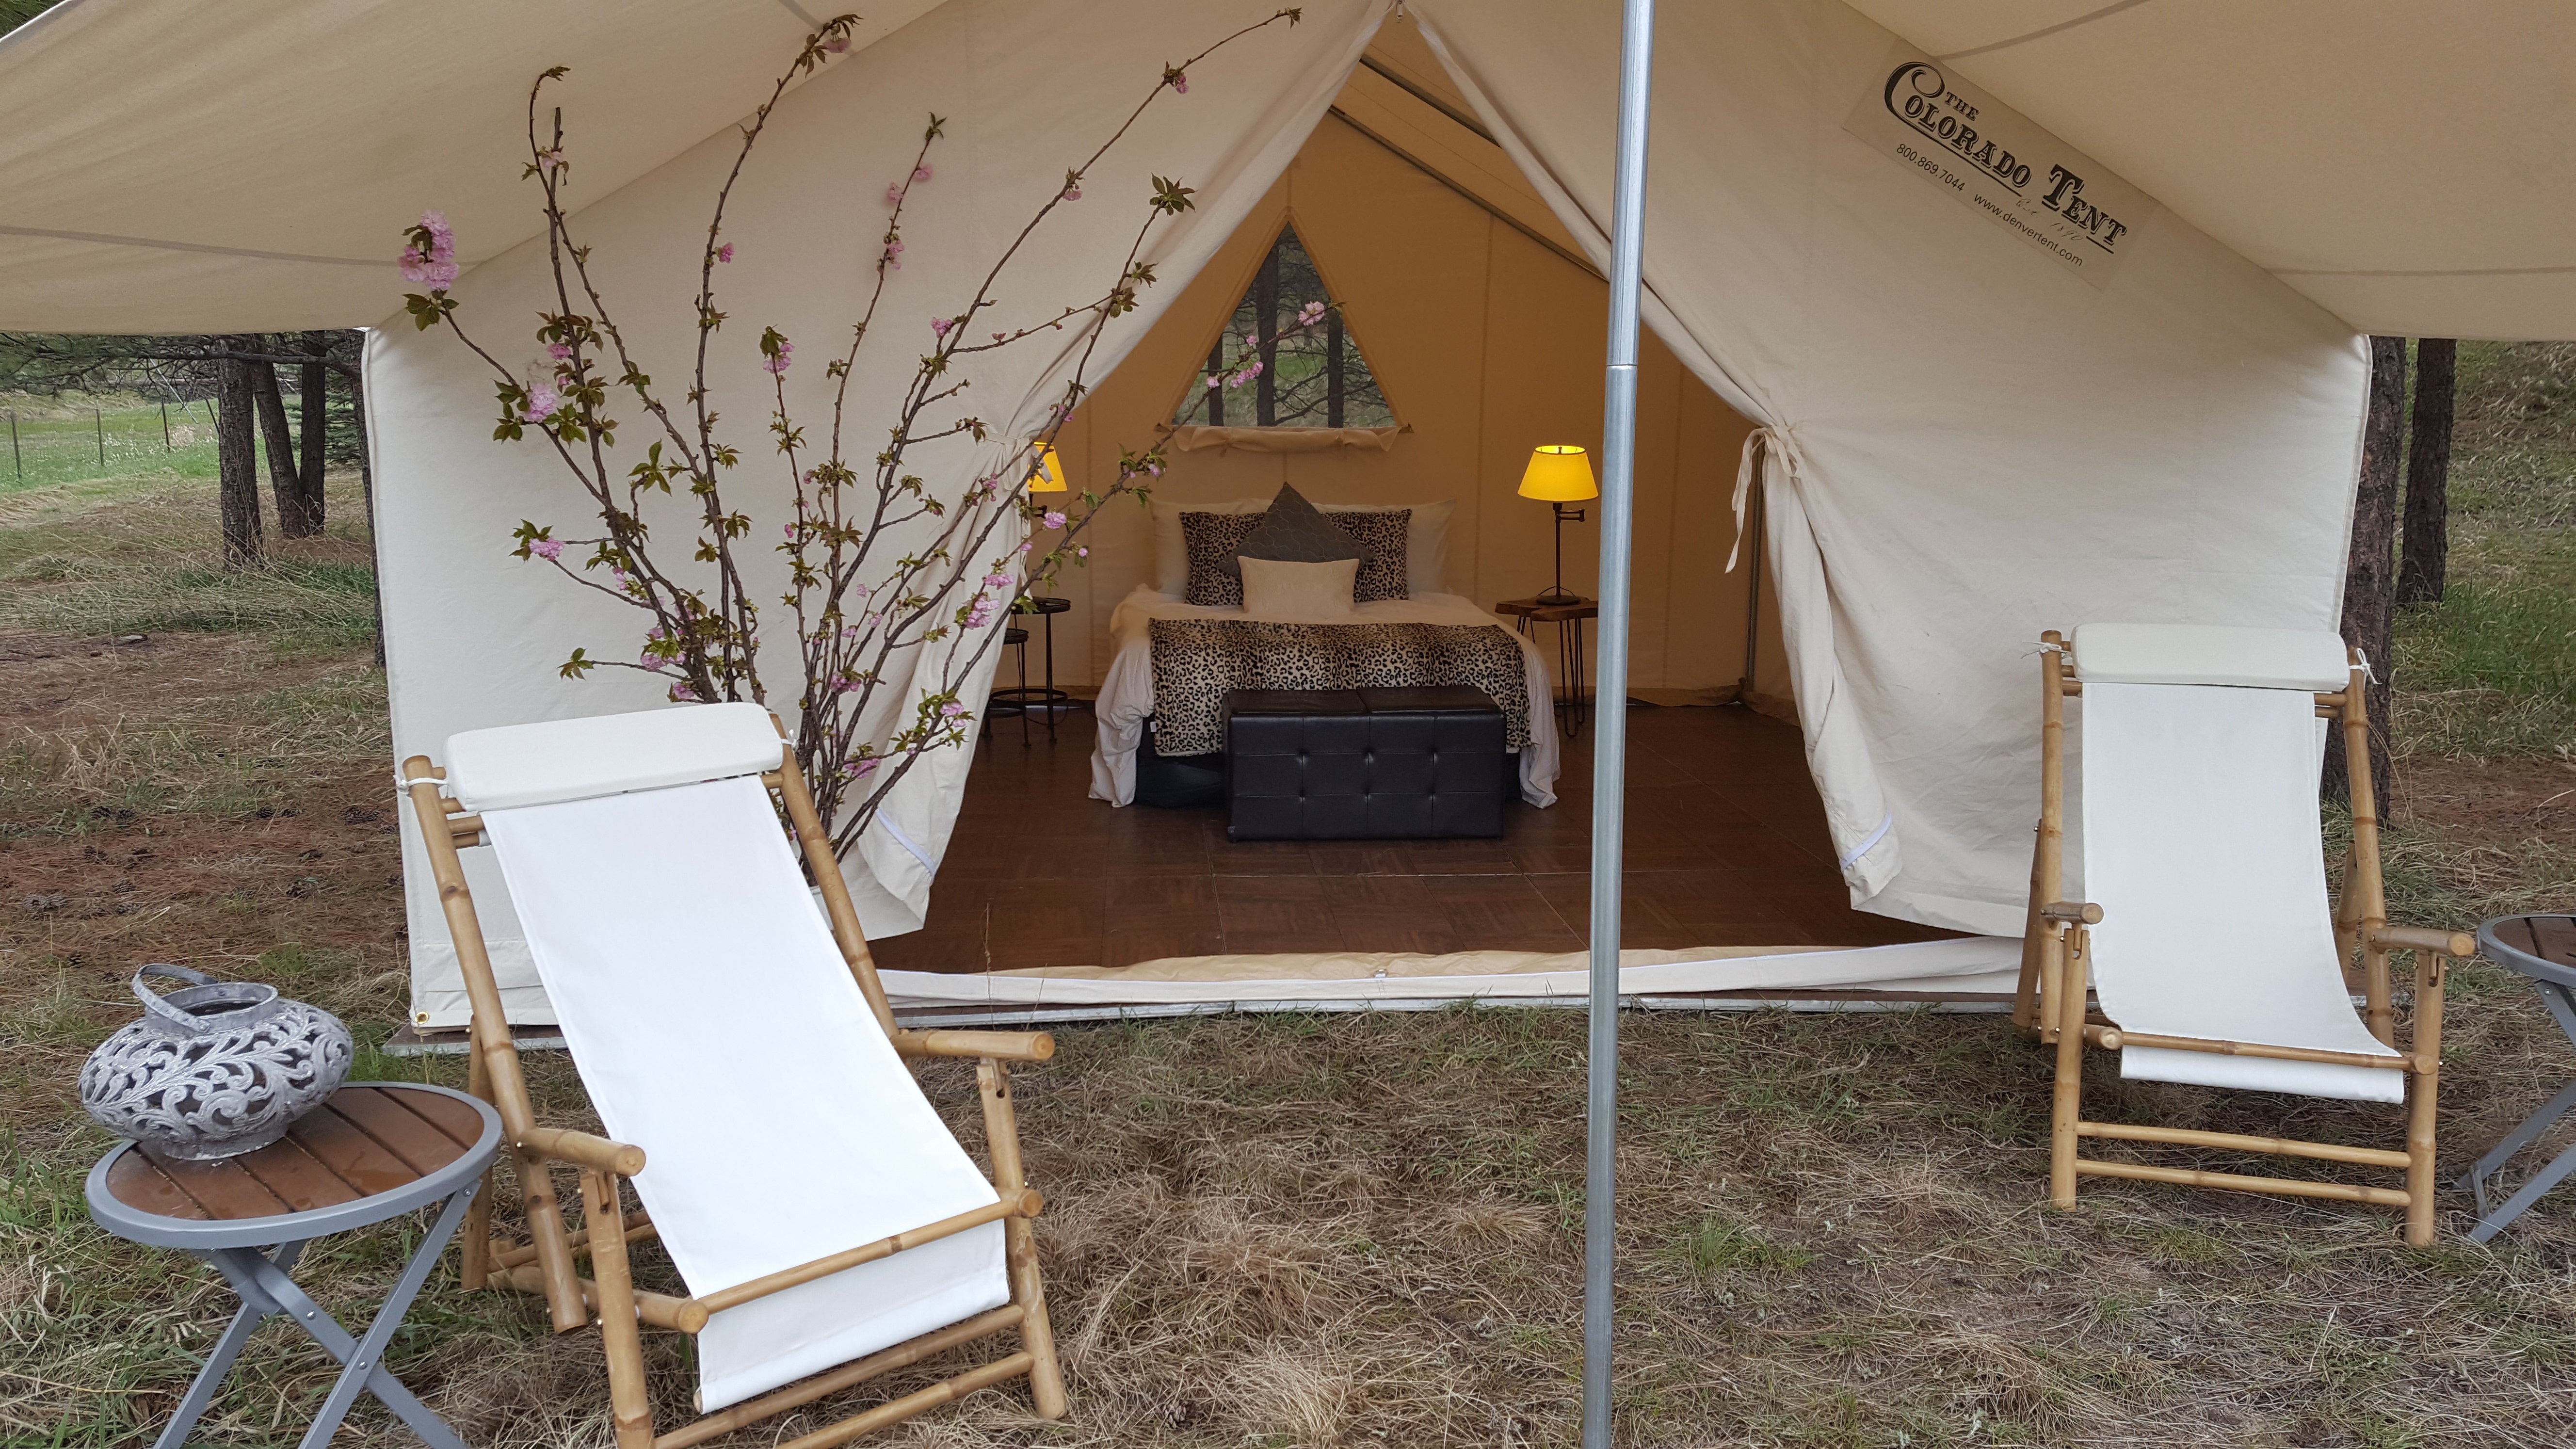 Glamping Tents Make You Feel Home, Home on the Range